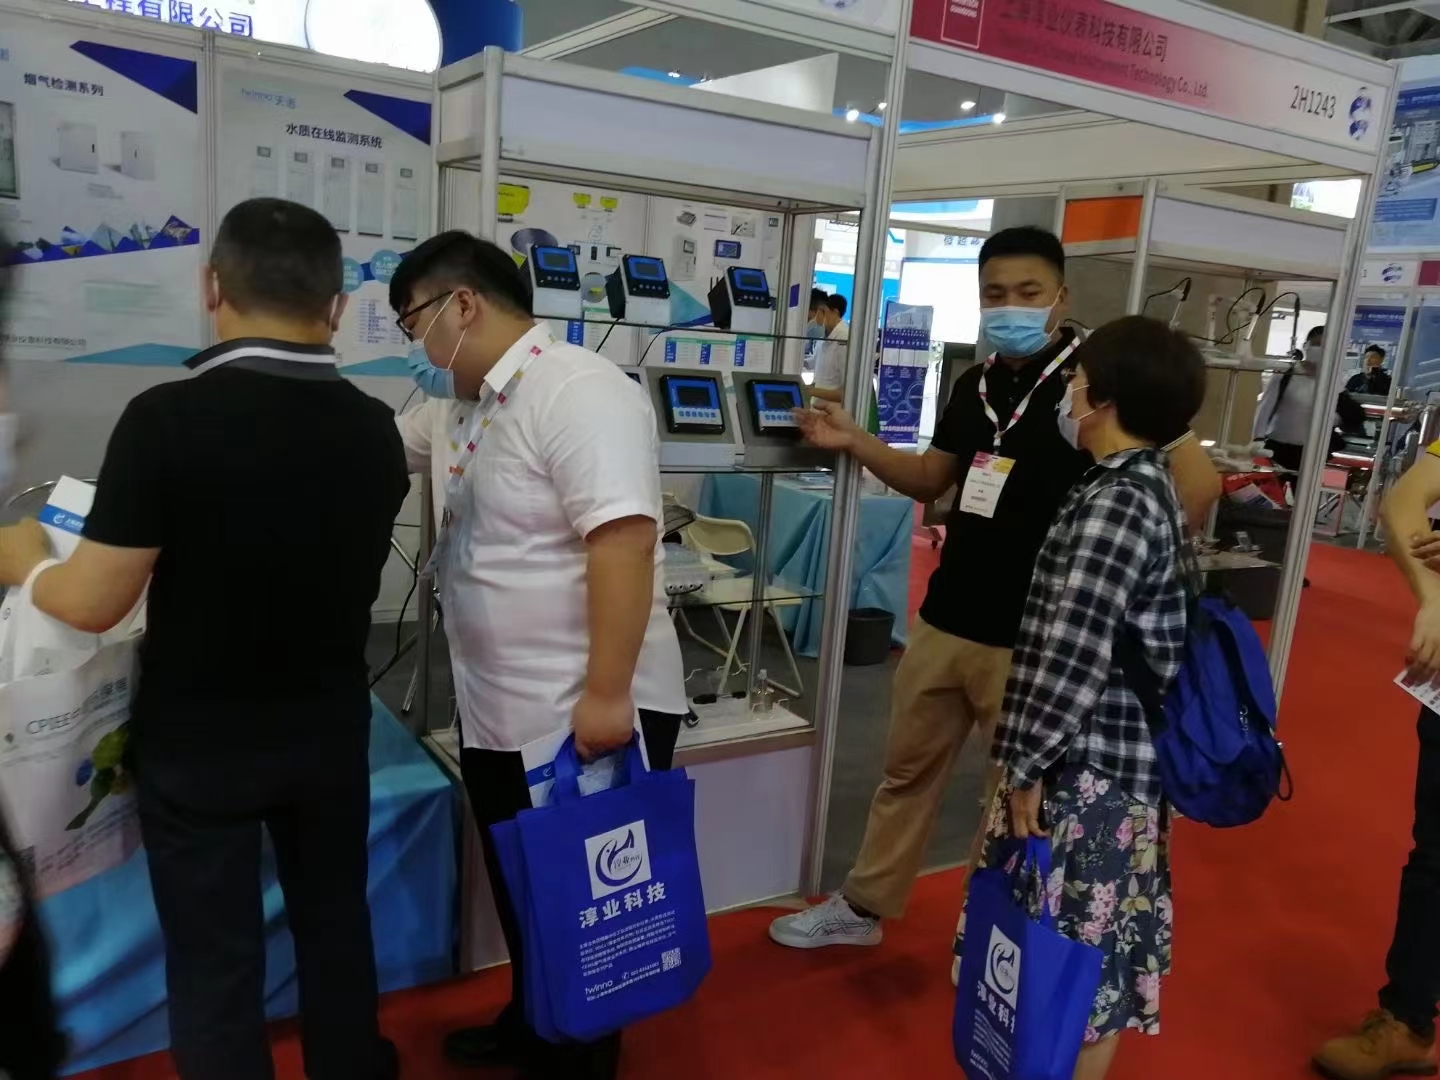 The 6th Guangdong International “Water Treatment Technology and Equipment” Exhibition